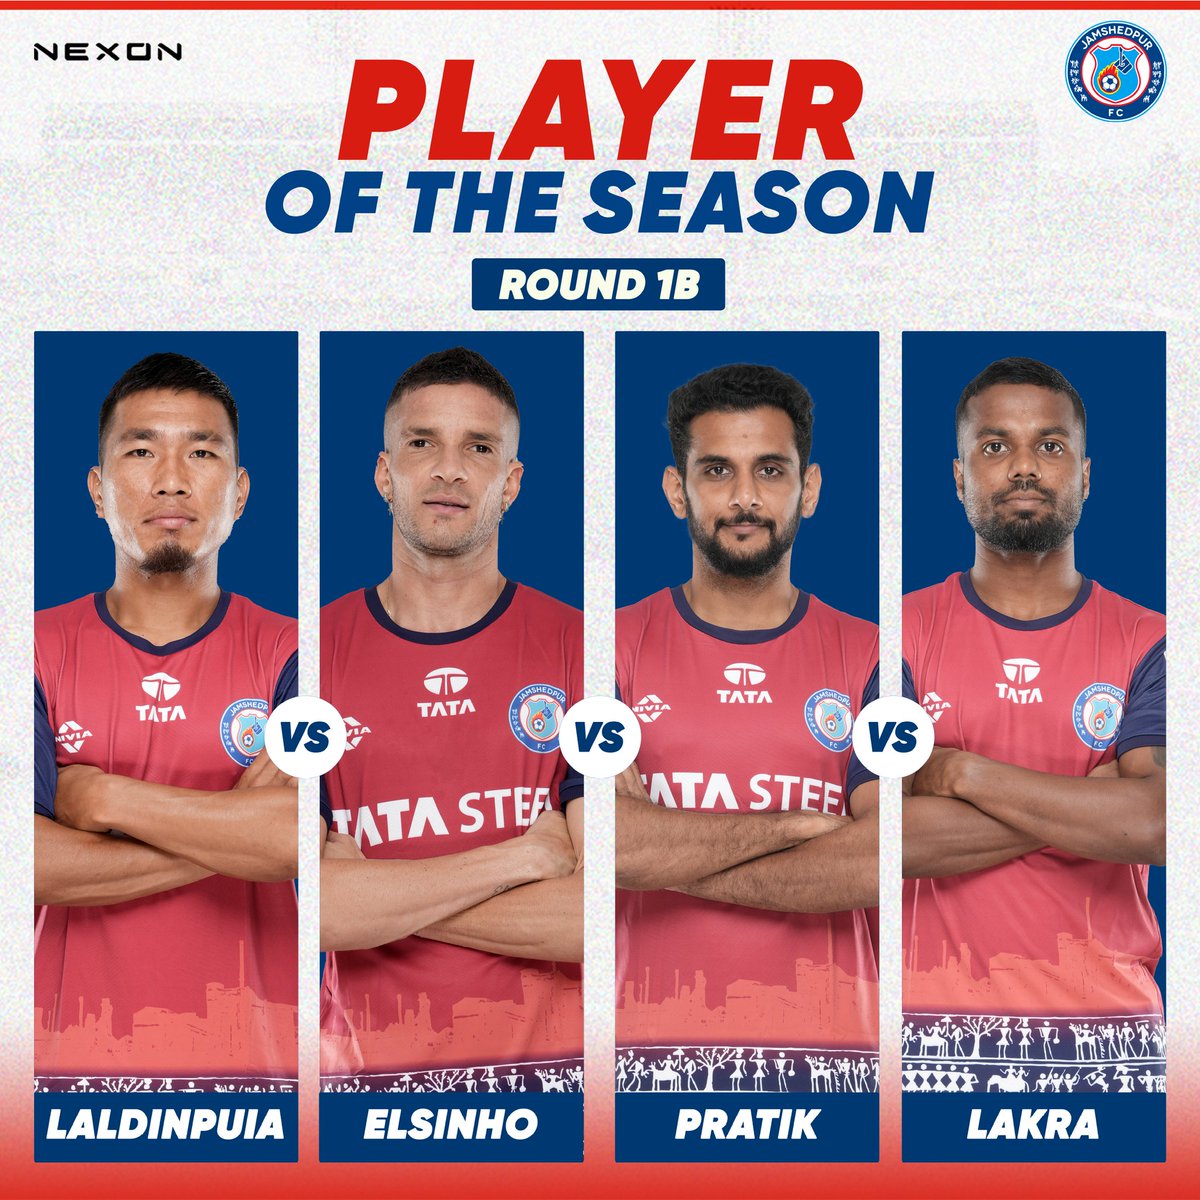 Who will rise to the top? 🏆 It's time to cast your vote for the Nexon JFC Player of the Season! Meet the 4 contenders of Round 1B and choose wisely. Every vote counts towards deciding the ultimate champion.🦾⚡ 1. PC Laldinpuia. 2. Elsinho 3. Pratik Chaudhari 4. Provat…